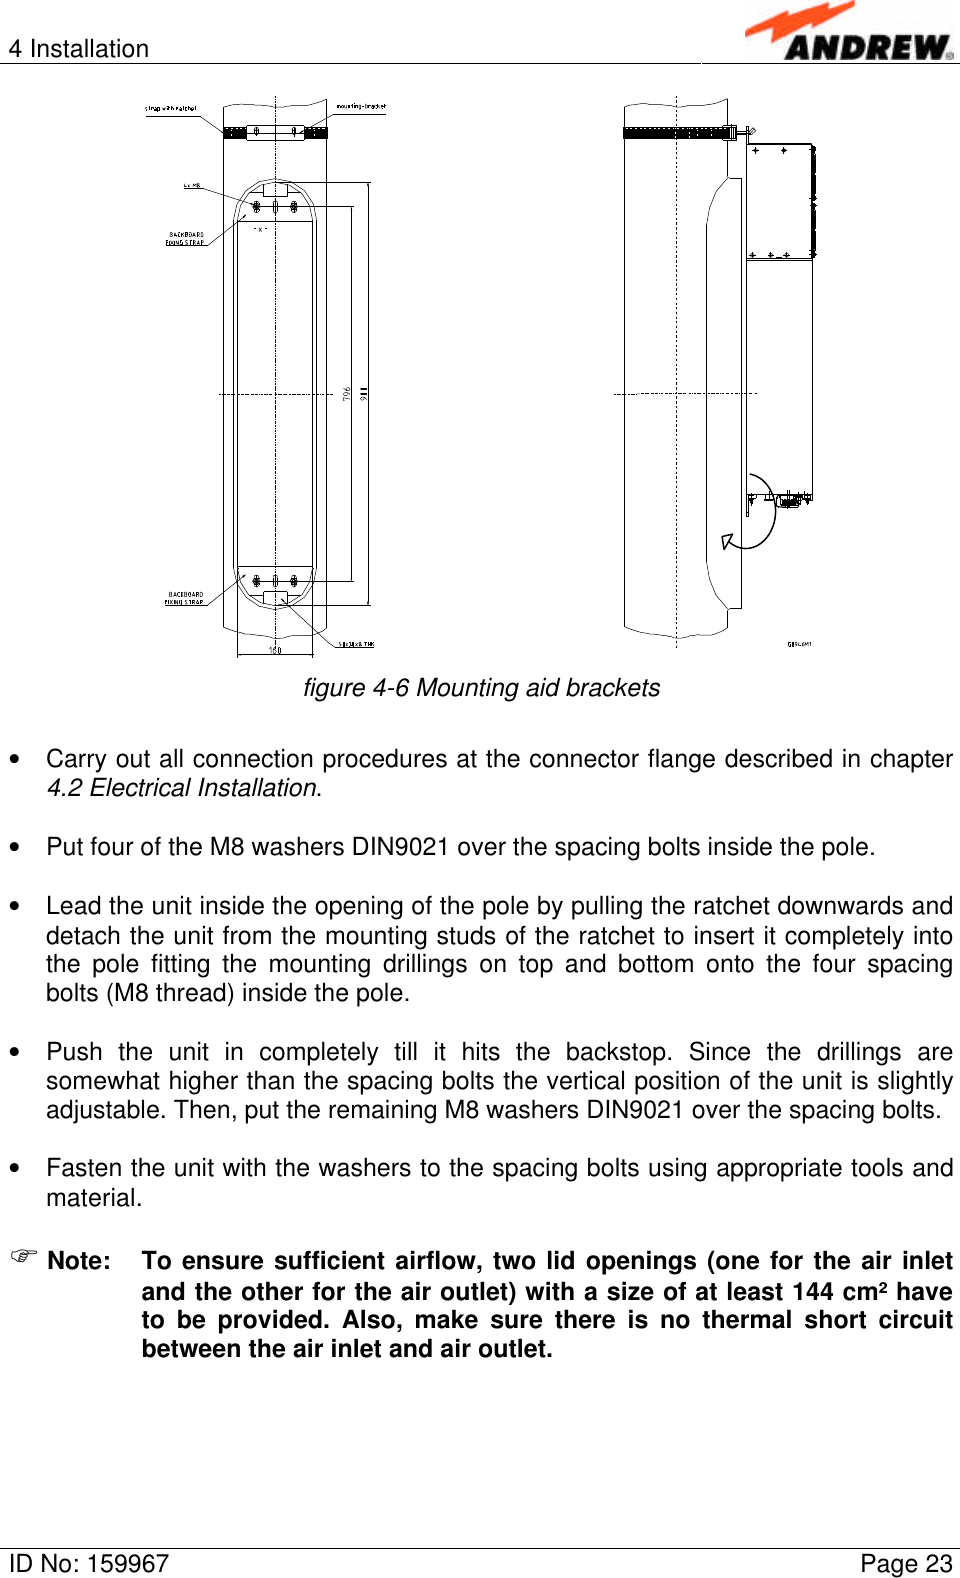 4 InstallationID No: 159967 Page 23figure 4-6 Mounting aid brackets• Carry out all connection procedures at the connector flange described in chapter4.2 Electrical Installation.• Put four of the M8 washers DIN9021 over the spacing bolts inside the pole.• Lead the unit inside the opening of the pole by pulling the ratchet downwards anddetach the unit from the mounting studs of the ratchet to insert it completely intothe pole fitting the mounting drillings on top and bottom onto the four spacingbolts (M8 thread) inside the pole.• Push the unit in completely till it hits the backstop. Since the drillings aresomewhat higher than the spacing bolts the vertical position of the unit is slightlyadjustable. Then, put the remaining M8 washers DIN9021 over the spacing bolts.• Fasten the unit with the washers to the spacing bolts using appropriate tools andmaterial.F Note: To ensure sufficient airflow, two lid openings (one for the air inletand the other for the air outlet) with a size of at least 144 cm² haveto be provided. Also, make sure there is no thermal short circuitbetween the air inlet and air outlet.